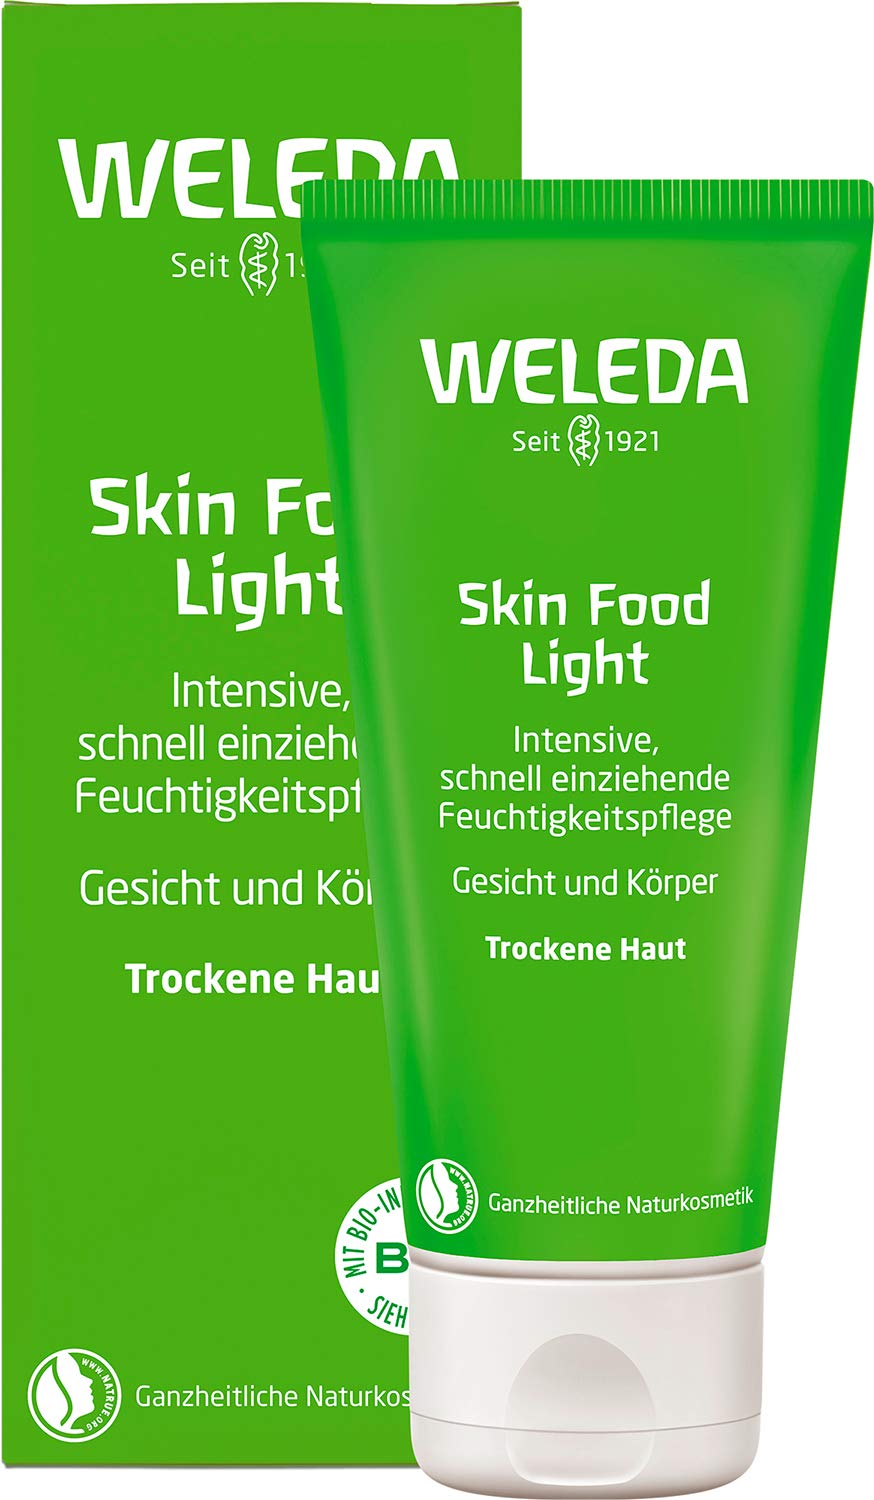 Weleda Skin Food Light Moisturising Cream - Natural Cosmetics for Face and Body - Intensively Soothing and Moisturising Skin Cream for Dry Skin (1 x 75 ml), ‎transparent